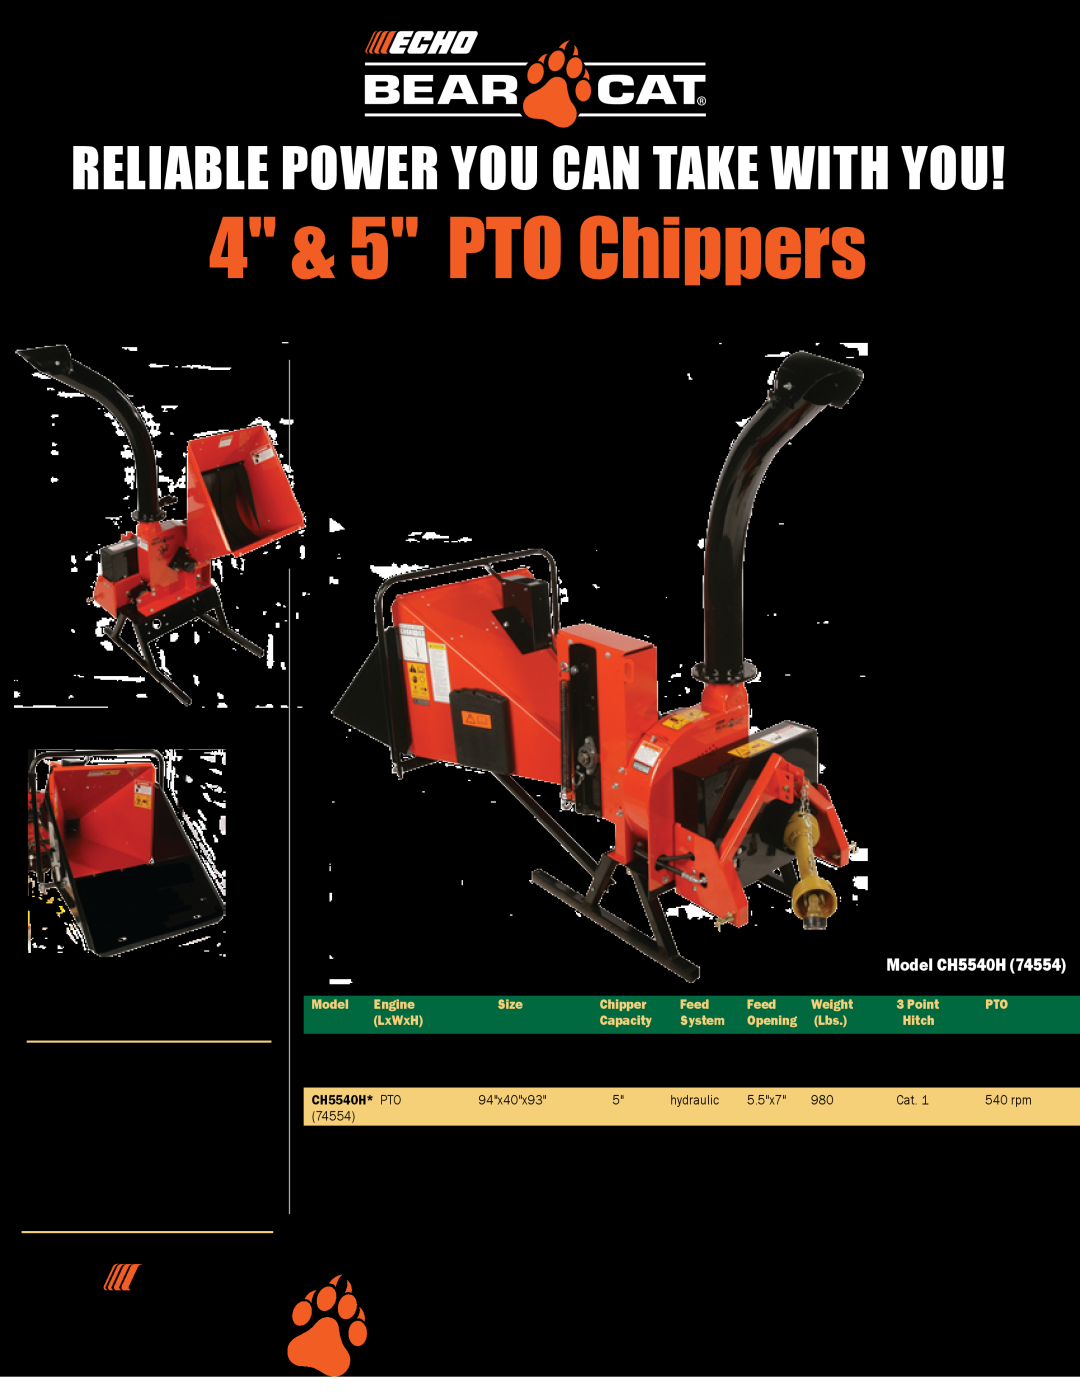 Echo Bear Cat CH4540* manual Find a dealer near you, 4 & 5 PTO Chippers, Reliable power you can take with you, Model, Size 